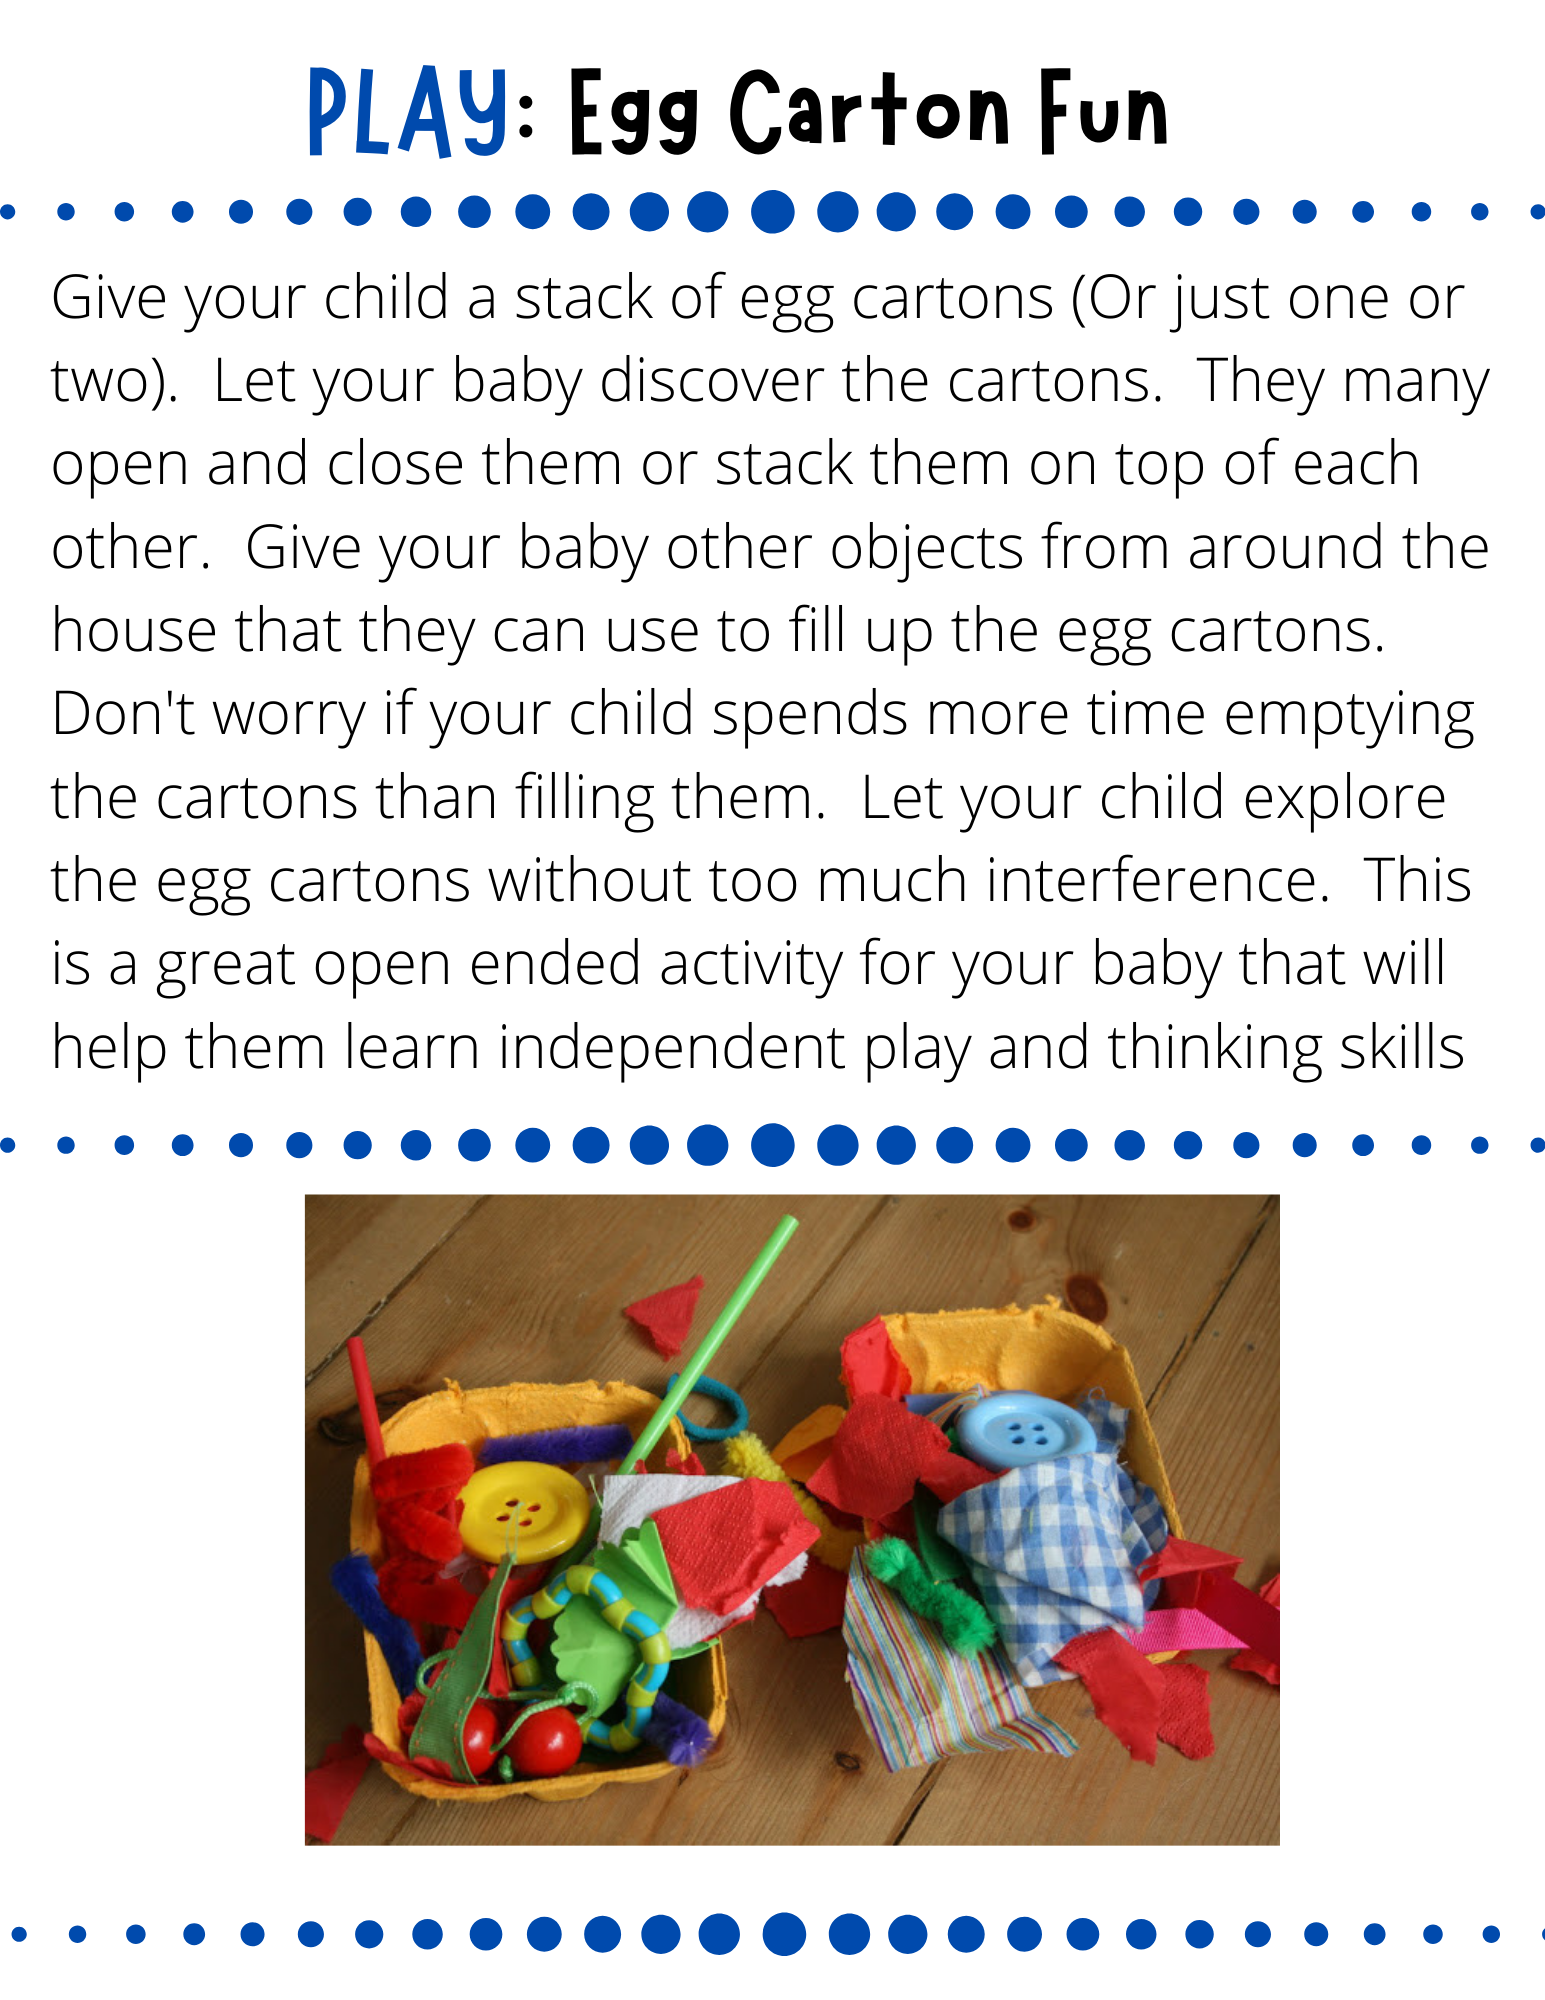 PLAY: Egg Carton Fun Give your child a stack of egg cartons (Or just one or two).  Let your baby discover the cartons.  They many open and close them or stack them on top of each other.  Give your baby other objects from around the house that they can use to fill up the egg cartons.  Don't worry if your child spends more time emptying the cartons than filling them.  Let your child explore the egg cartons without too much interference.  This is a great open ended activity for your baby that will help them learn independent play and thinking skills.